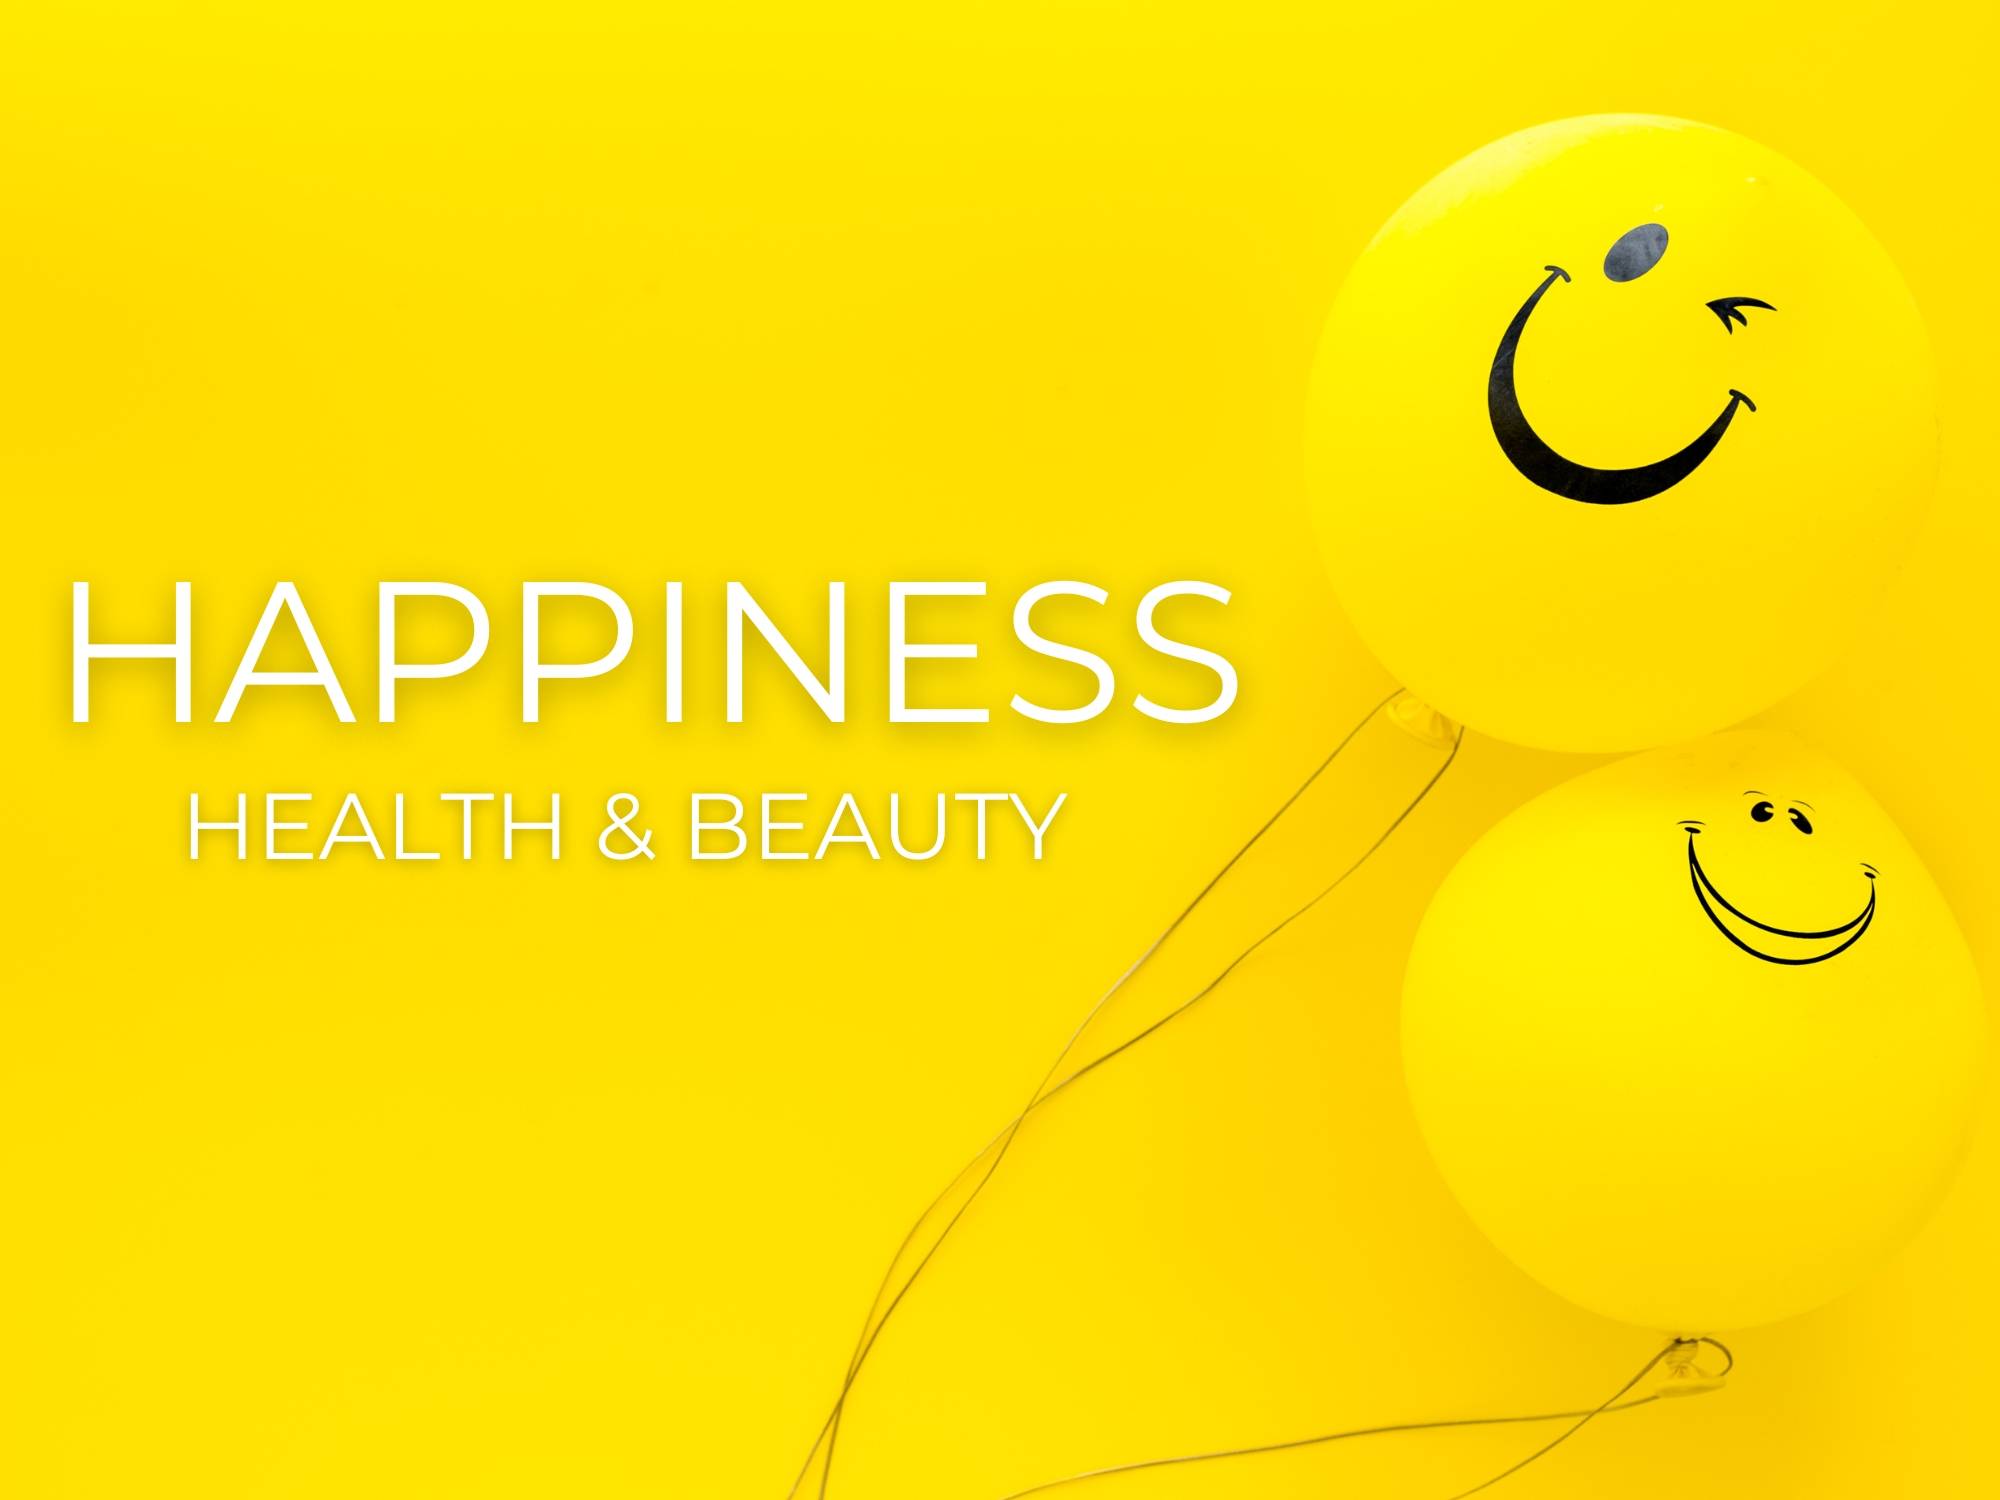 Happiness in health and beauty